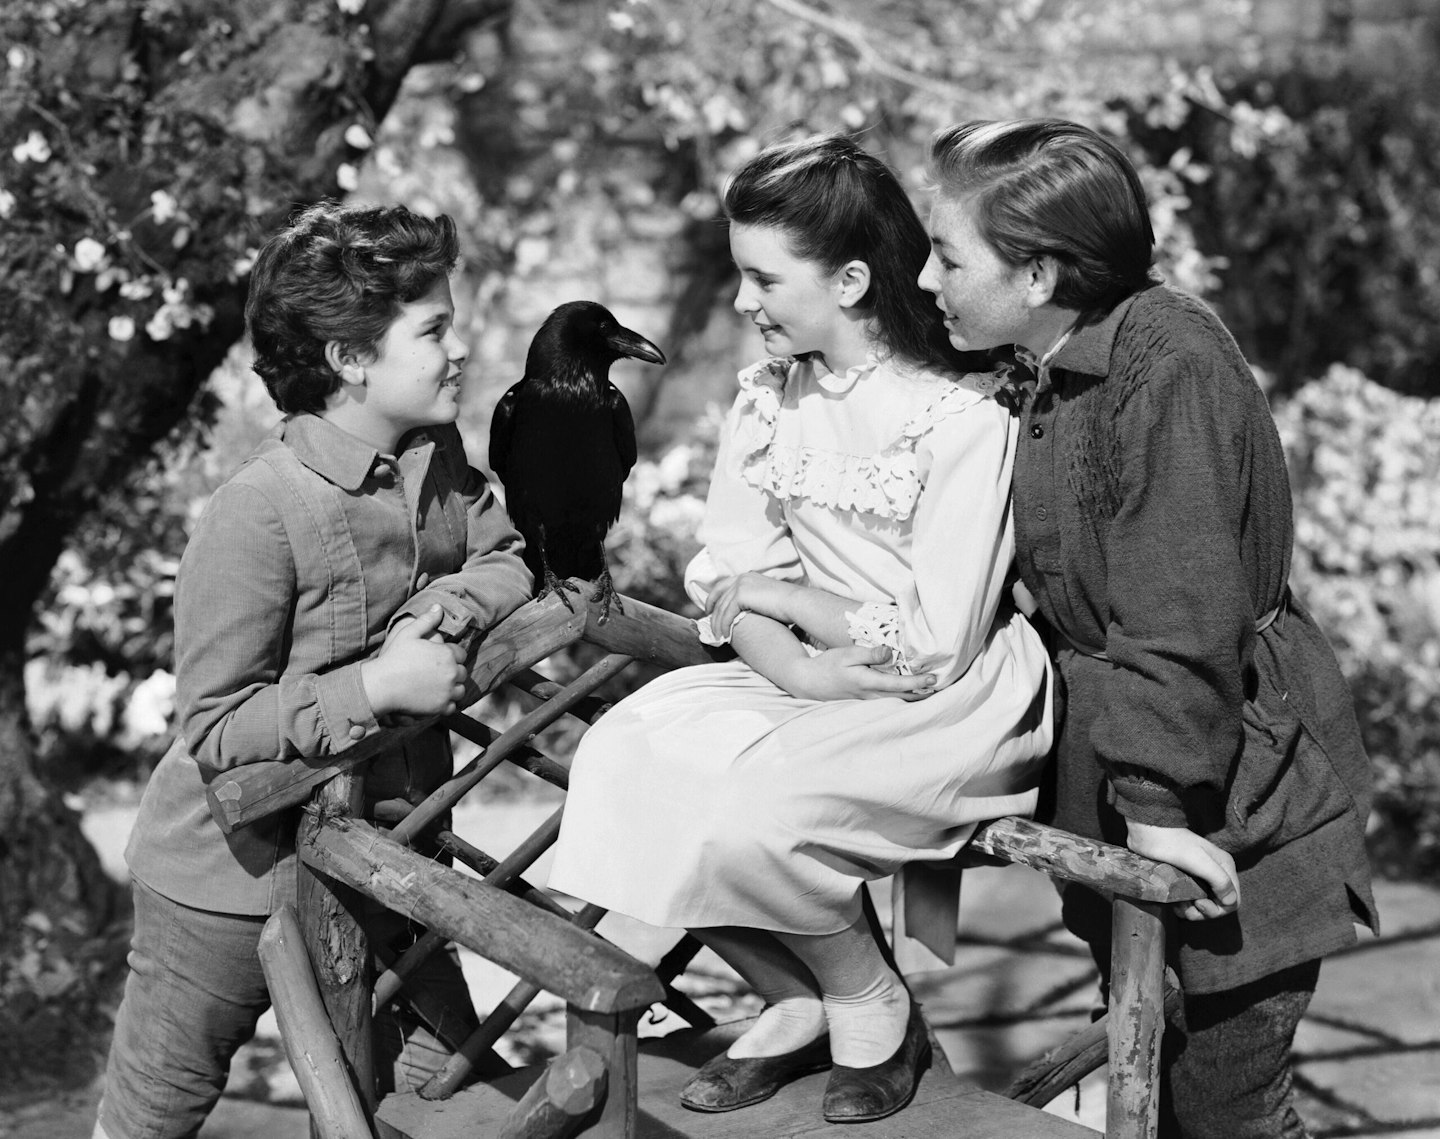 Jimmy the Raven with Dean Stockwell, Margaret O’Brien and Brian Roper in The Secret Garden (1949)